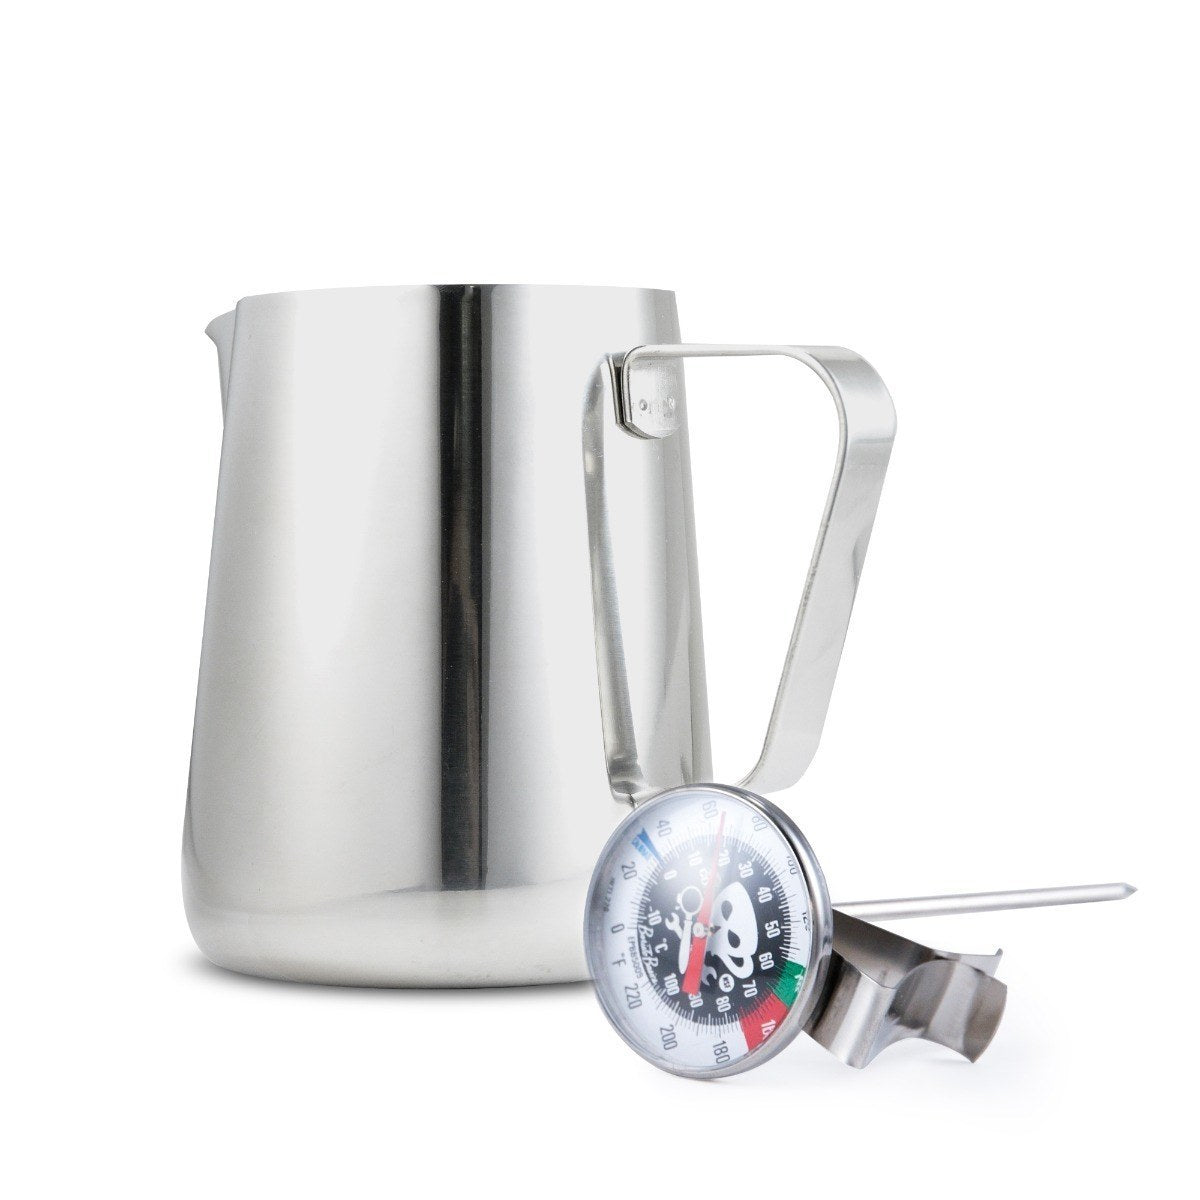 Stainless Steel Milk Frothing Pitcher With Thermometer for Steaming Milk -  Ideal Milk Thermometer and 20oz Milk Jug for Making Barista Style Coffee